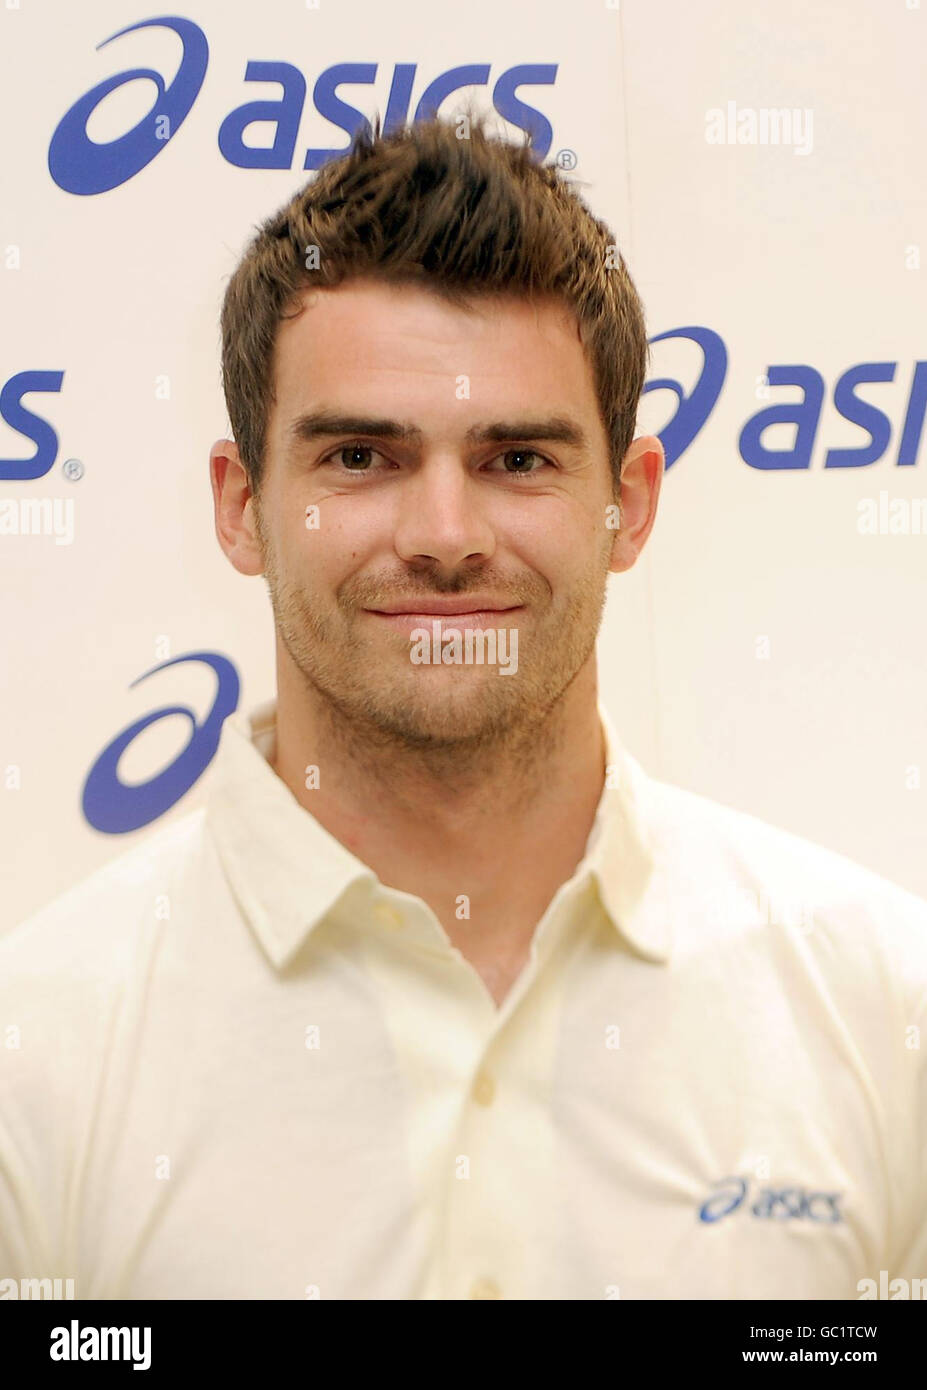 England cricketer James Anderson poses for media during the Asics Cricket Evening at Ascis Store in London. Stock Photo